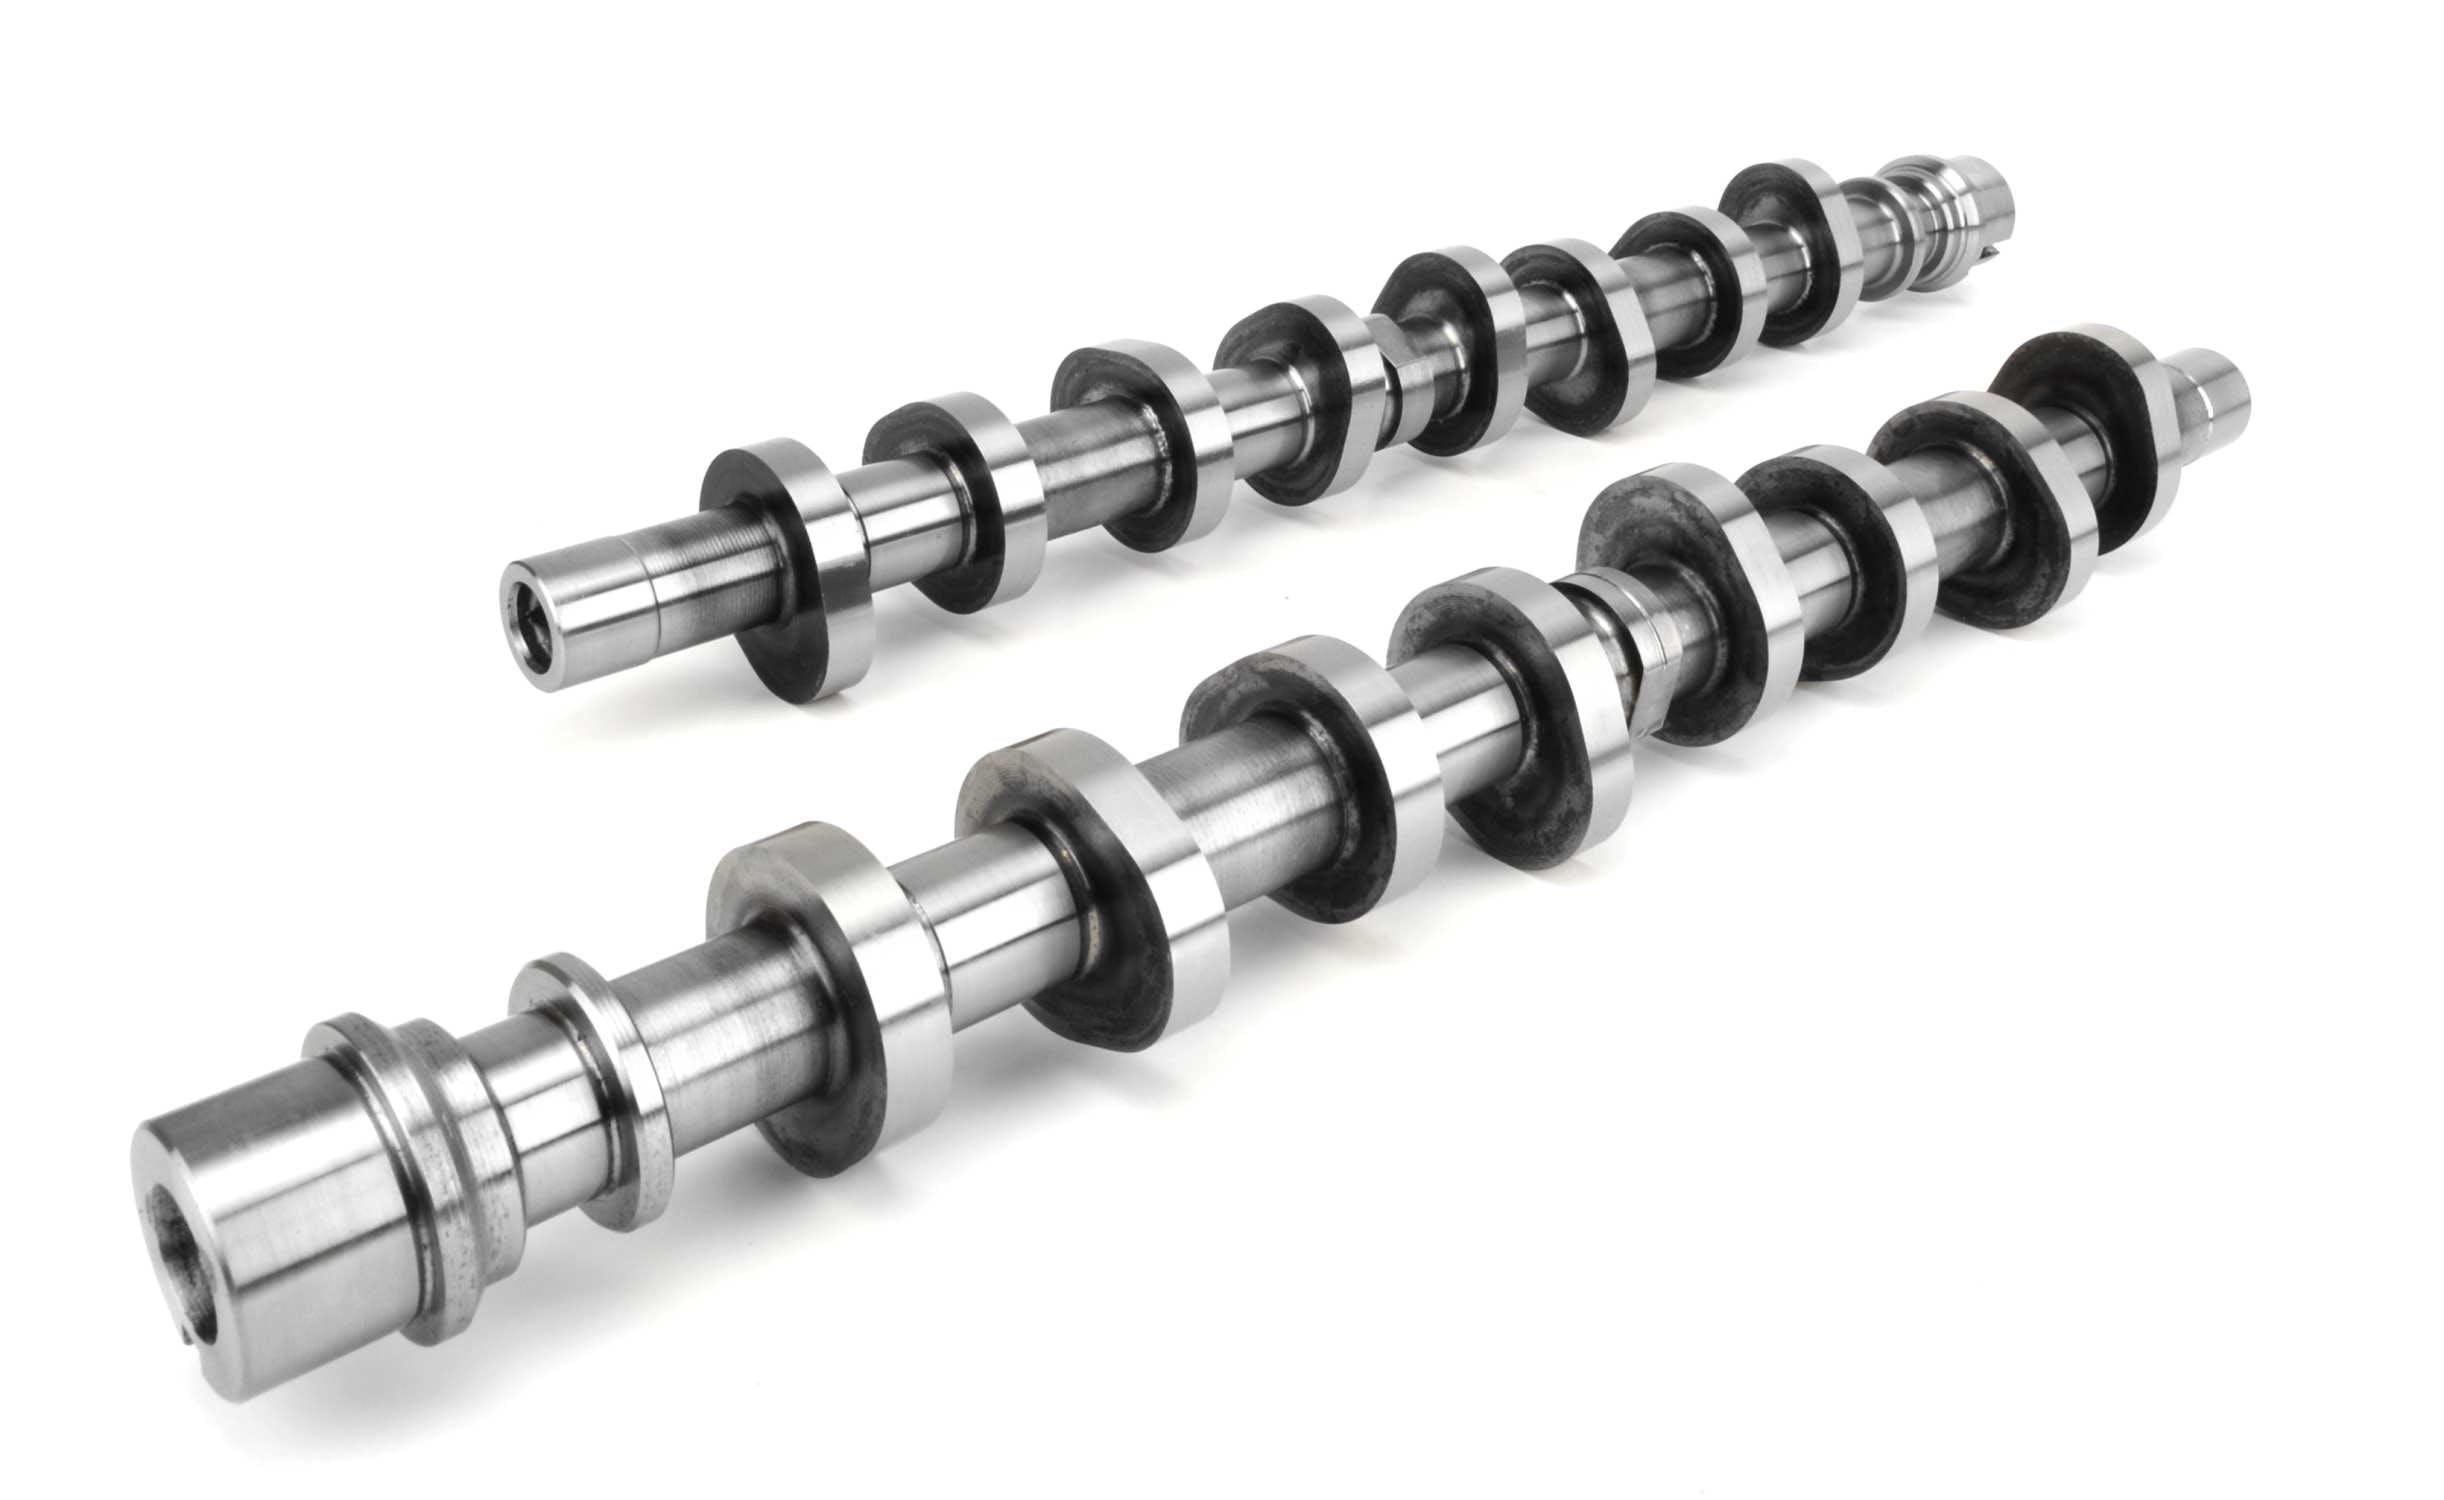 Competition Cams 102535 Tri-Power Xtreme Camshaft